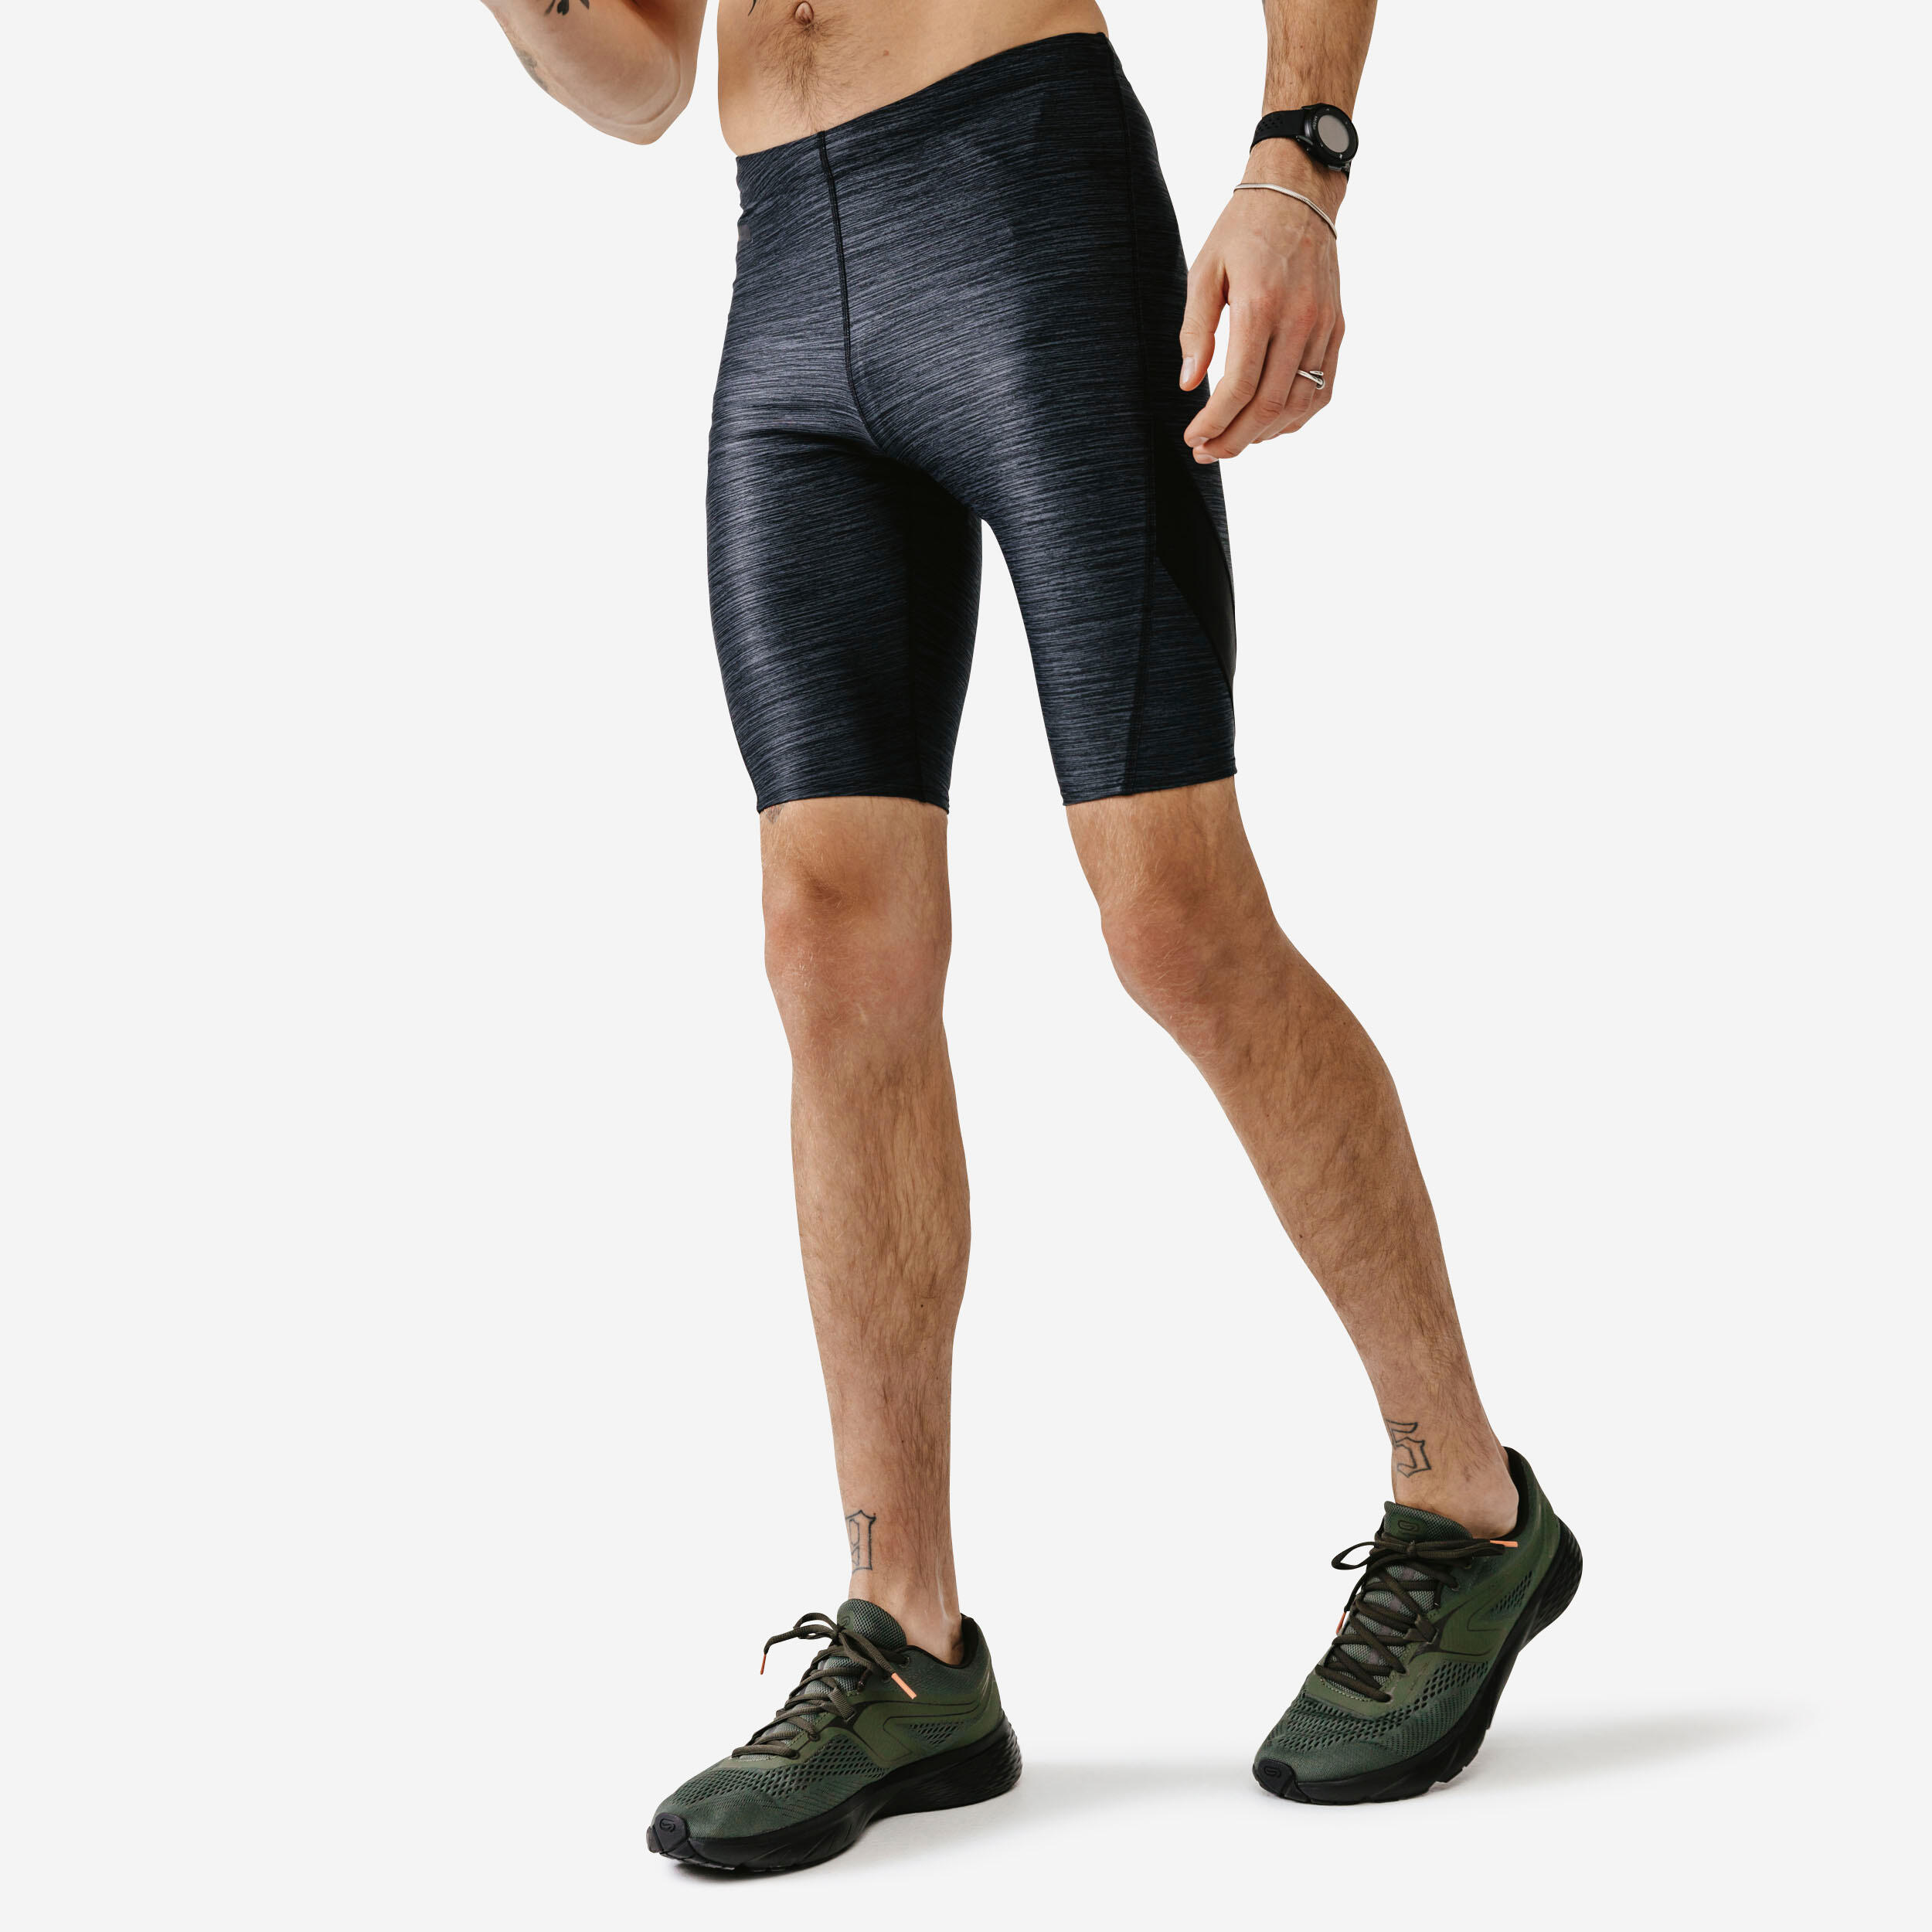 Men's Running Breathable Tight Shorts Dry+ - abyss grey 1/6